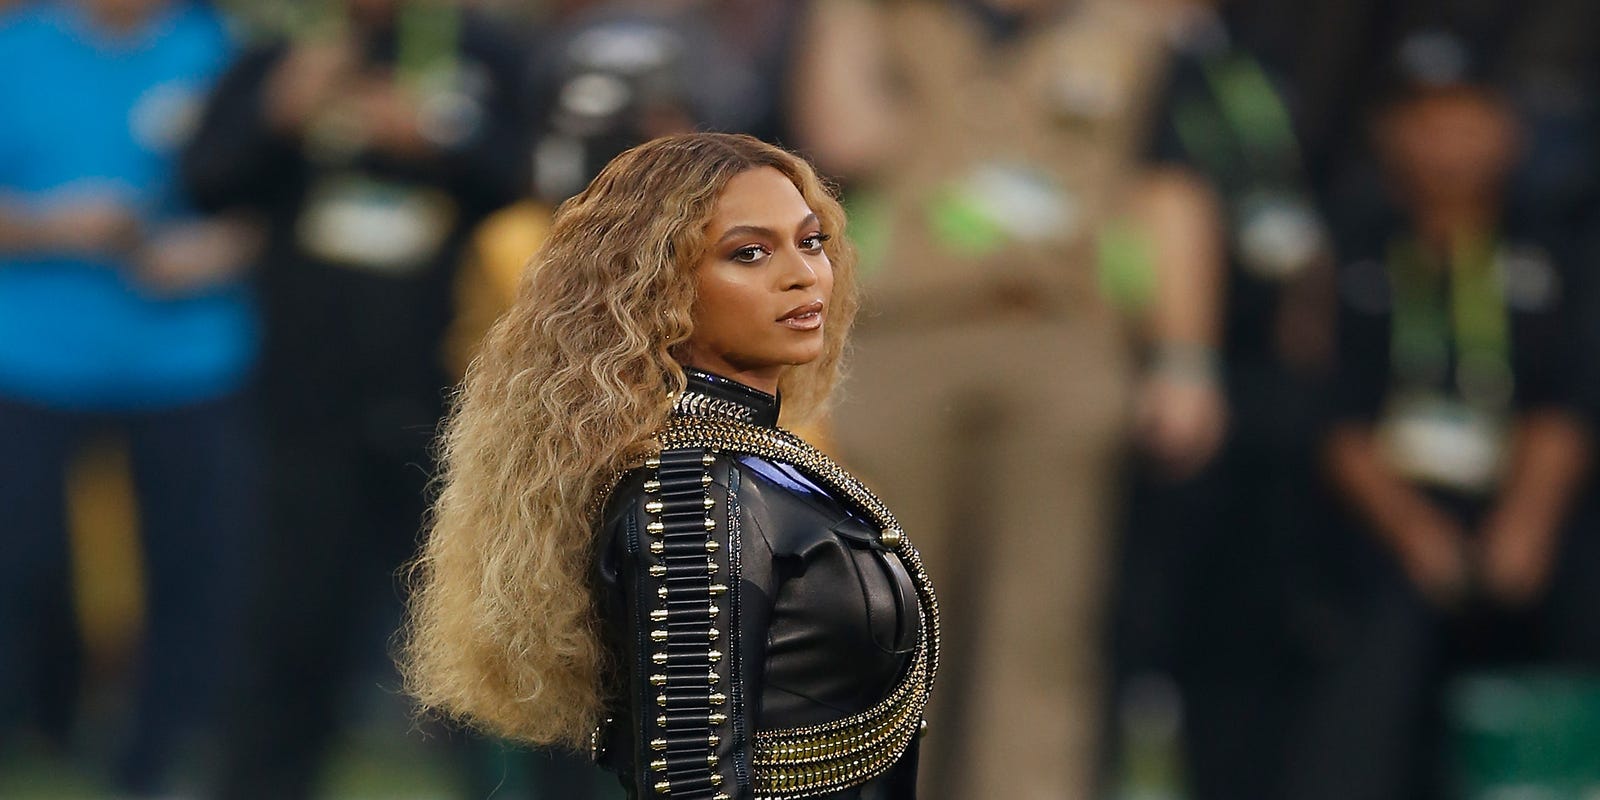 What does Becky mean? Here's the history behind Beyoncé's 'Lemonade' lyric  that sparked a firestorm.